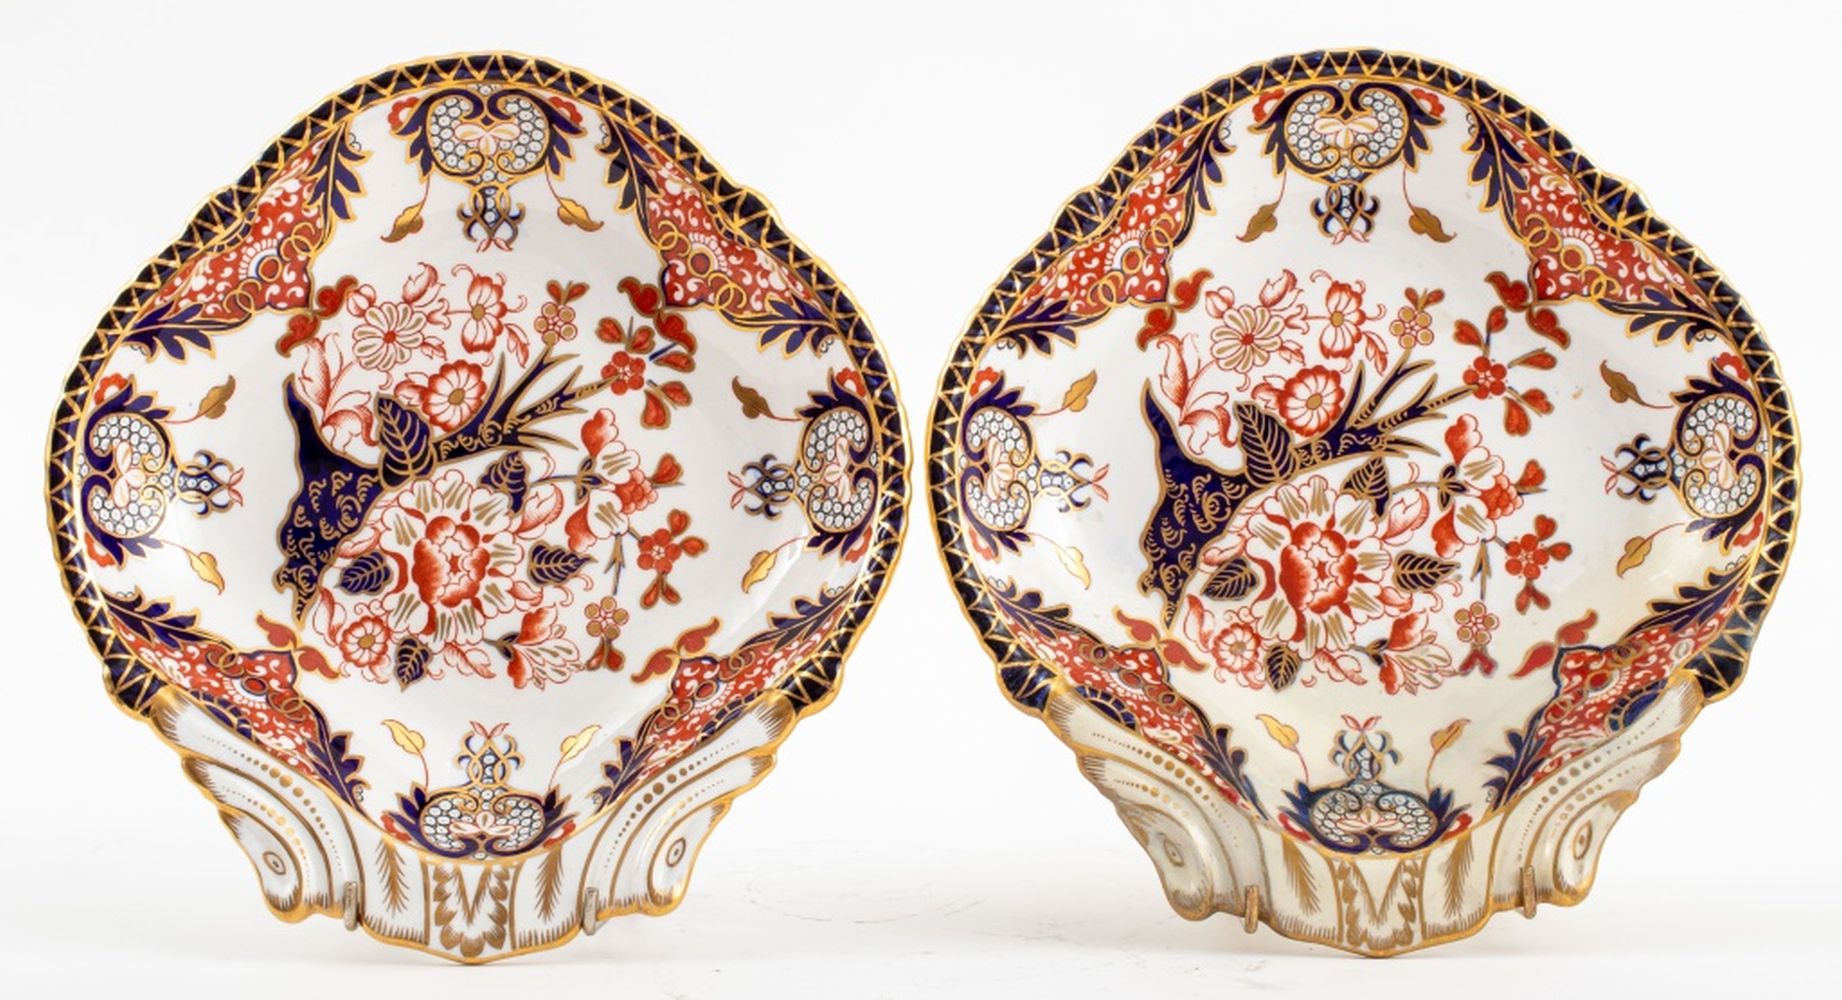 ROYAL CROWN DERBY "KINGS" SHELL-FORM